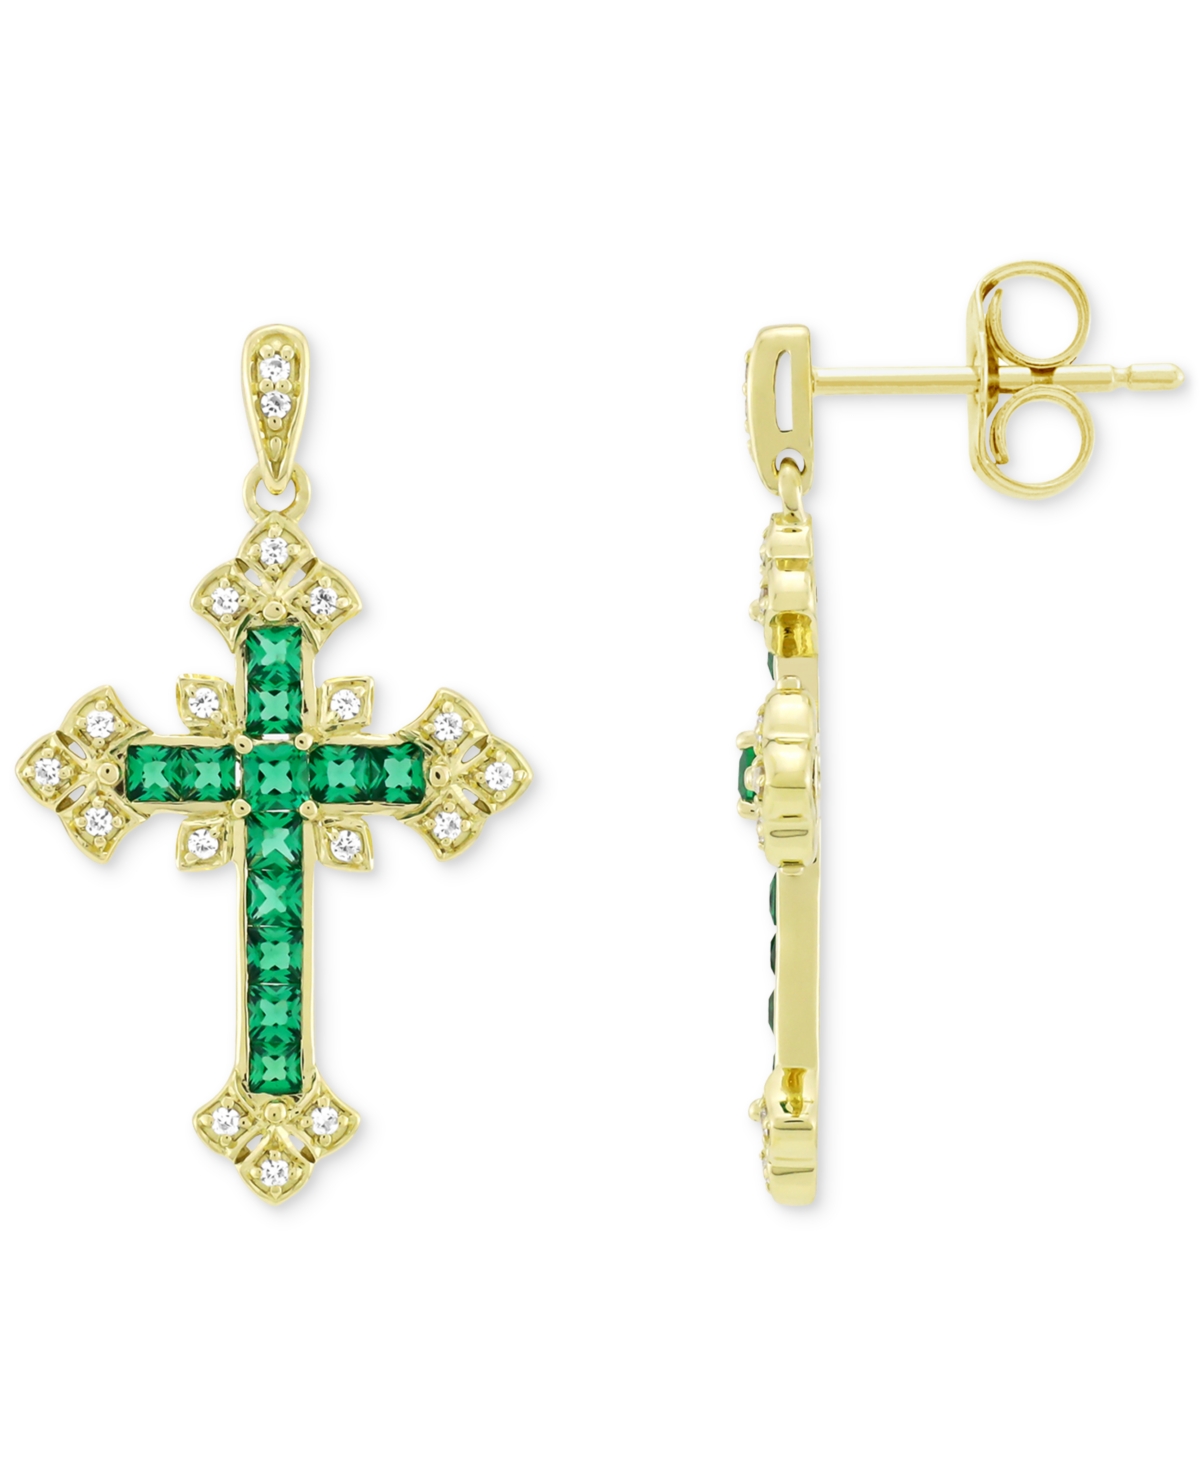 Lab-Grown Blue Sapphire (5/8 ct. t.w.) & Lab-Grown White Sapphire (1/10 ct. t.w.) Ornate Cross Drop Earrings in 14k Gold-Plated Sterling Silver (Also